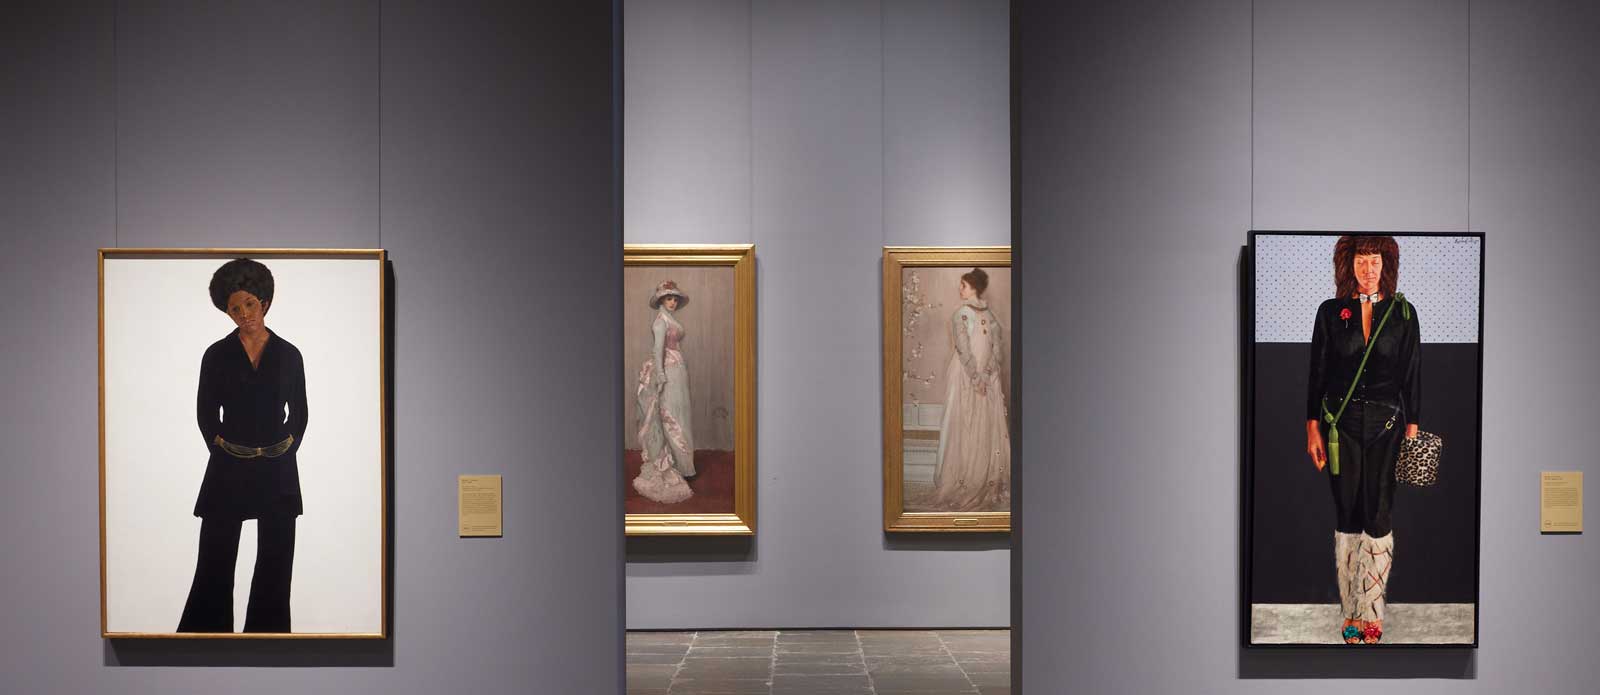 Miss T and Ma Petite Kumquat flanking a gallery of Frick Collection works by James McNeill Whistler  By Natasha H. Arora September 27, 2023